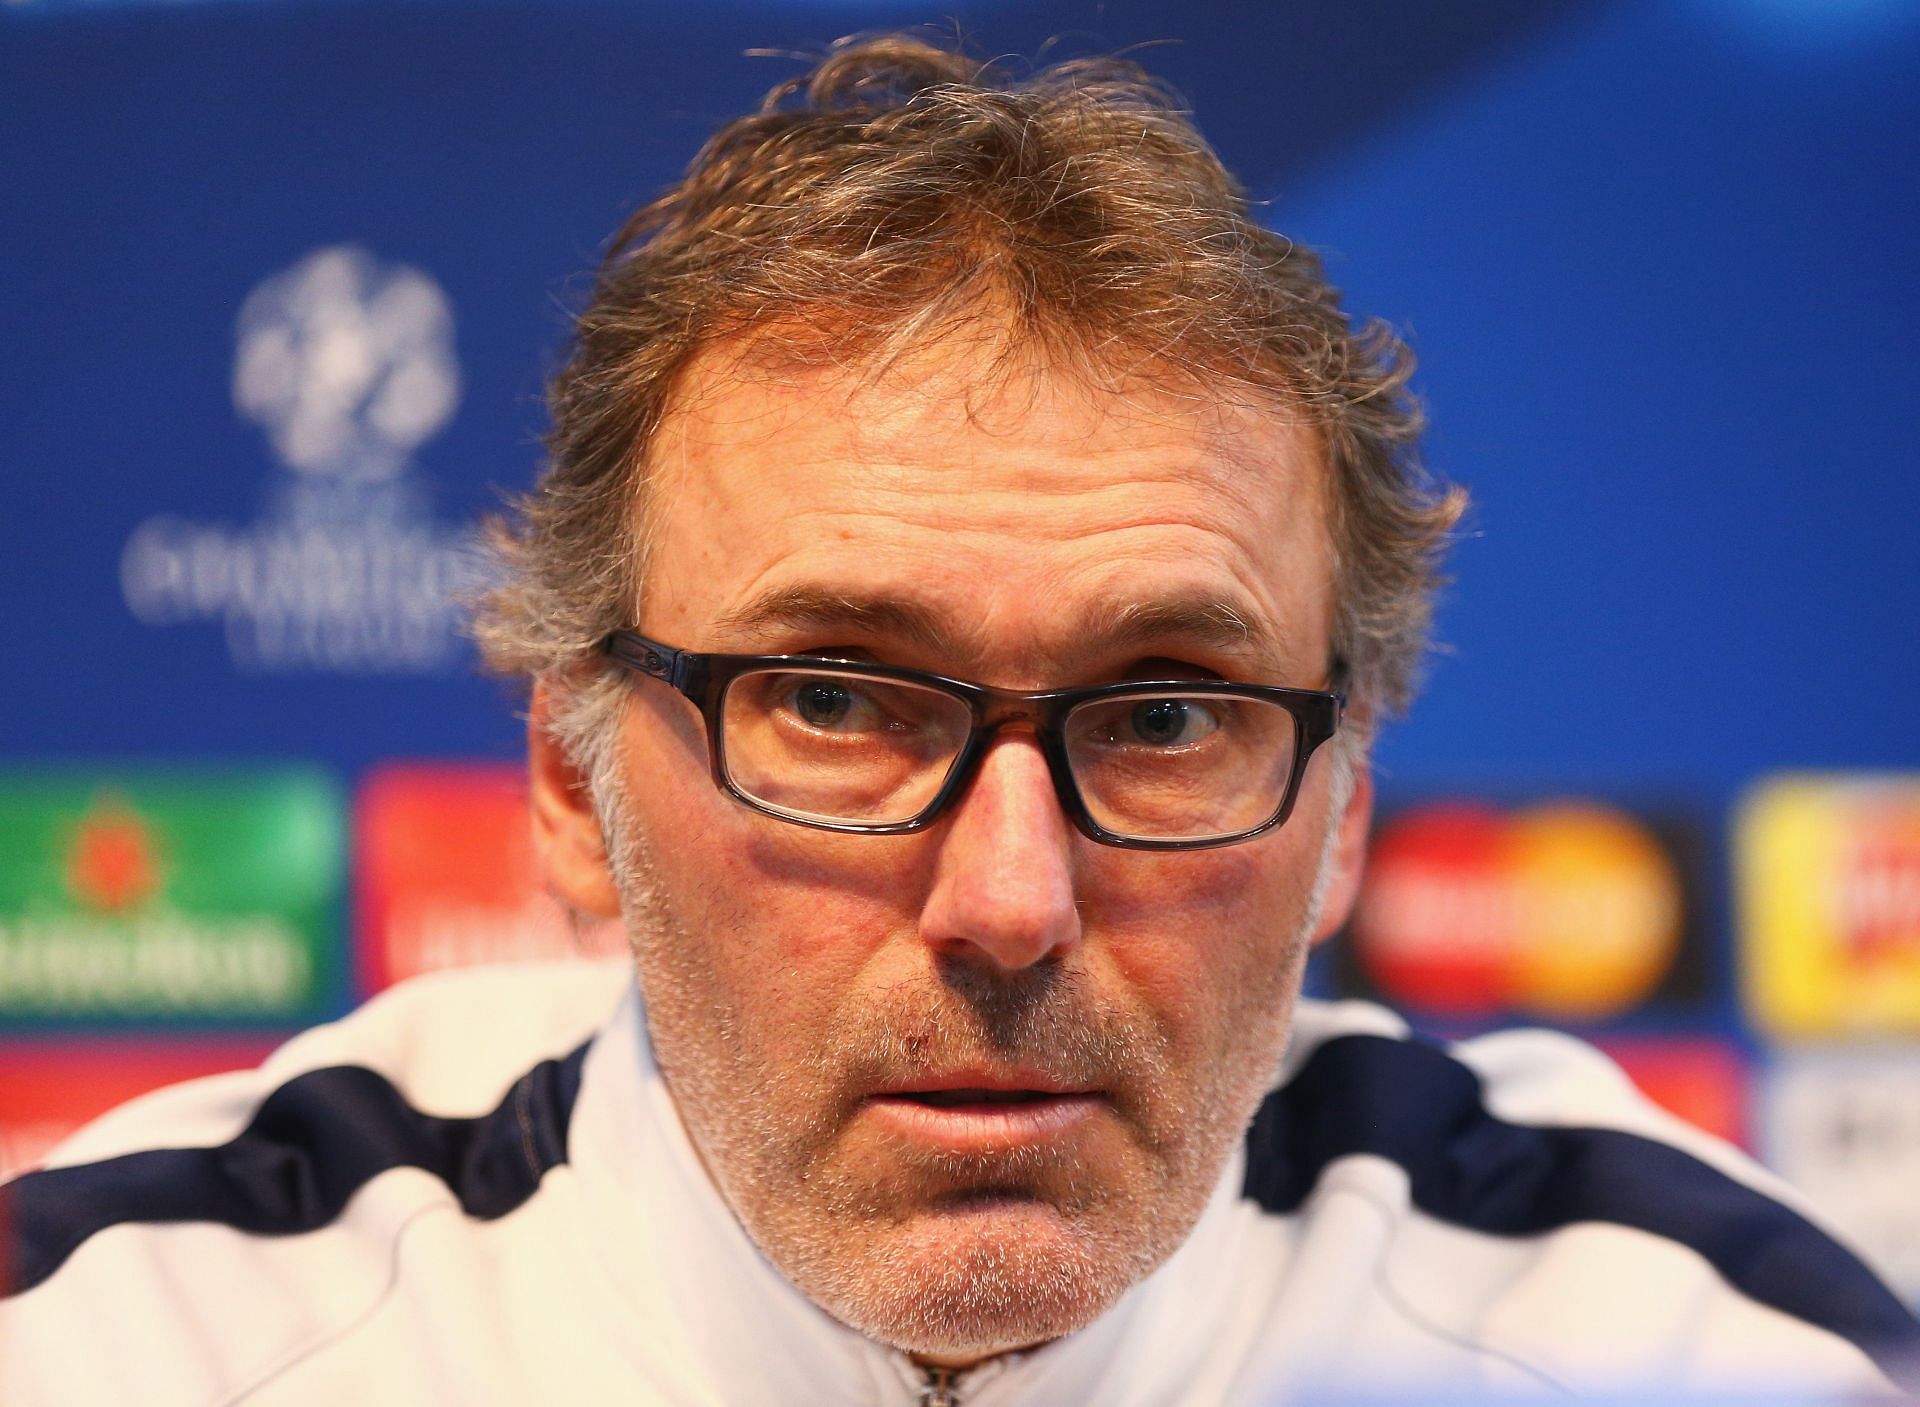 Laurent Blanc addresses the press before a game.